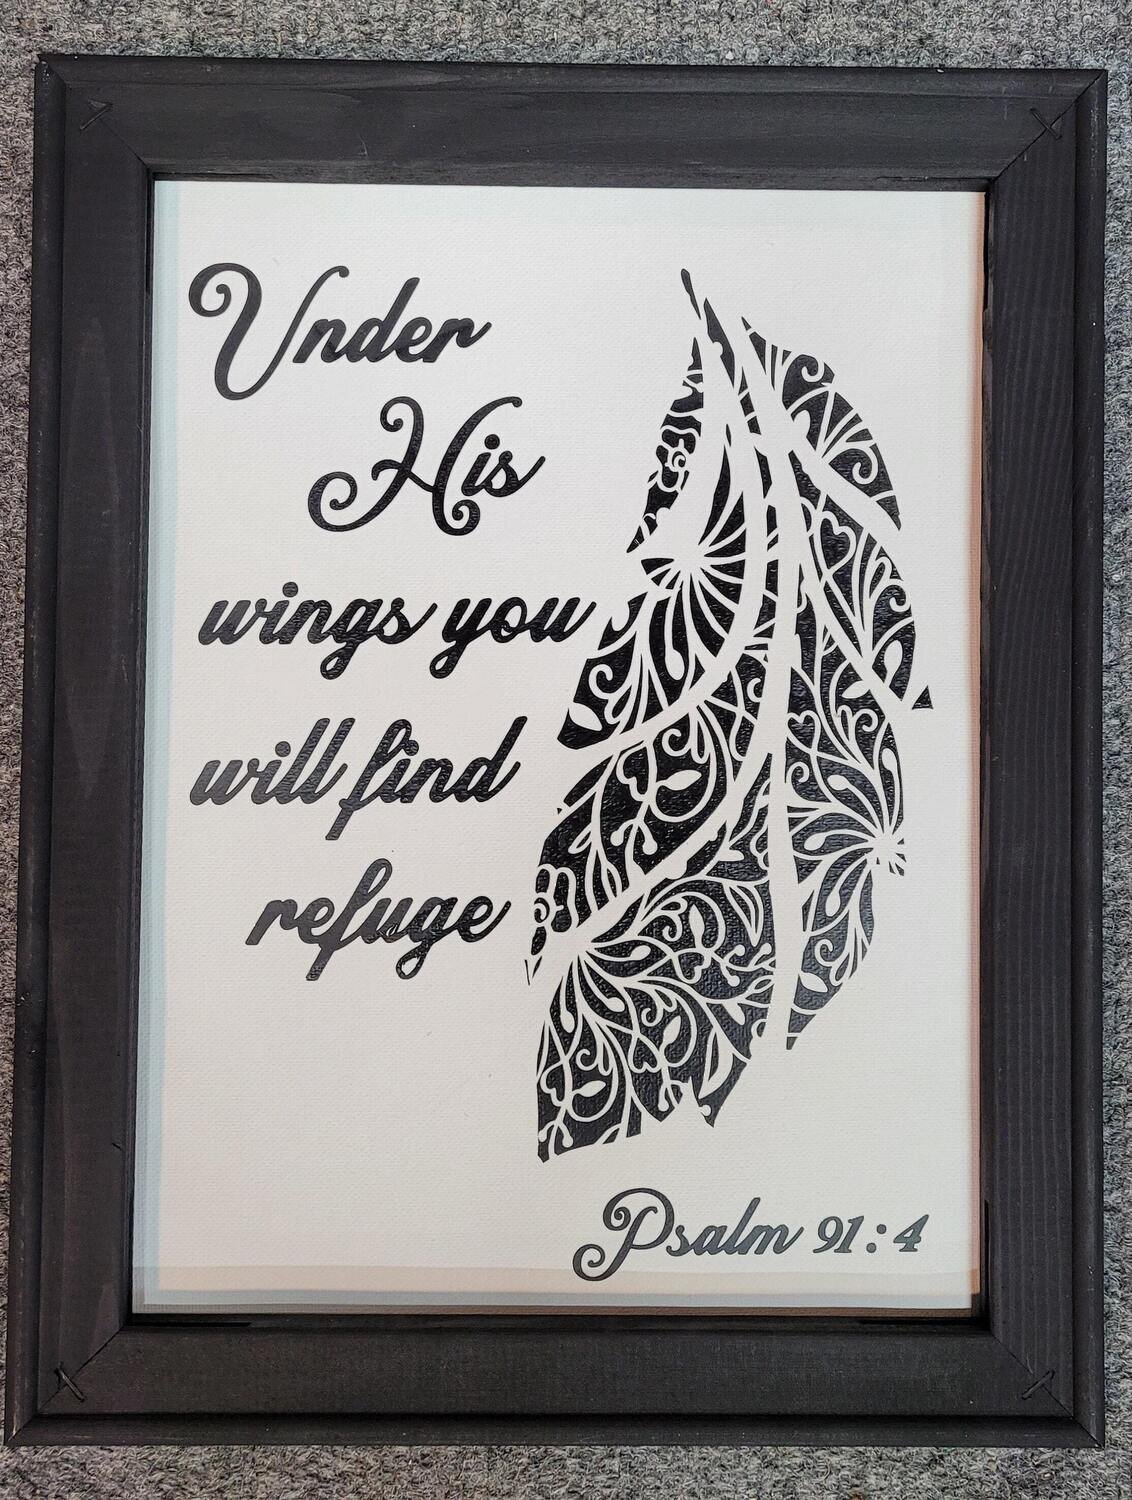 Framed art work - Under His wings you will find refuge - psalm 91